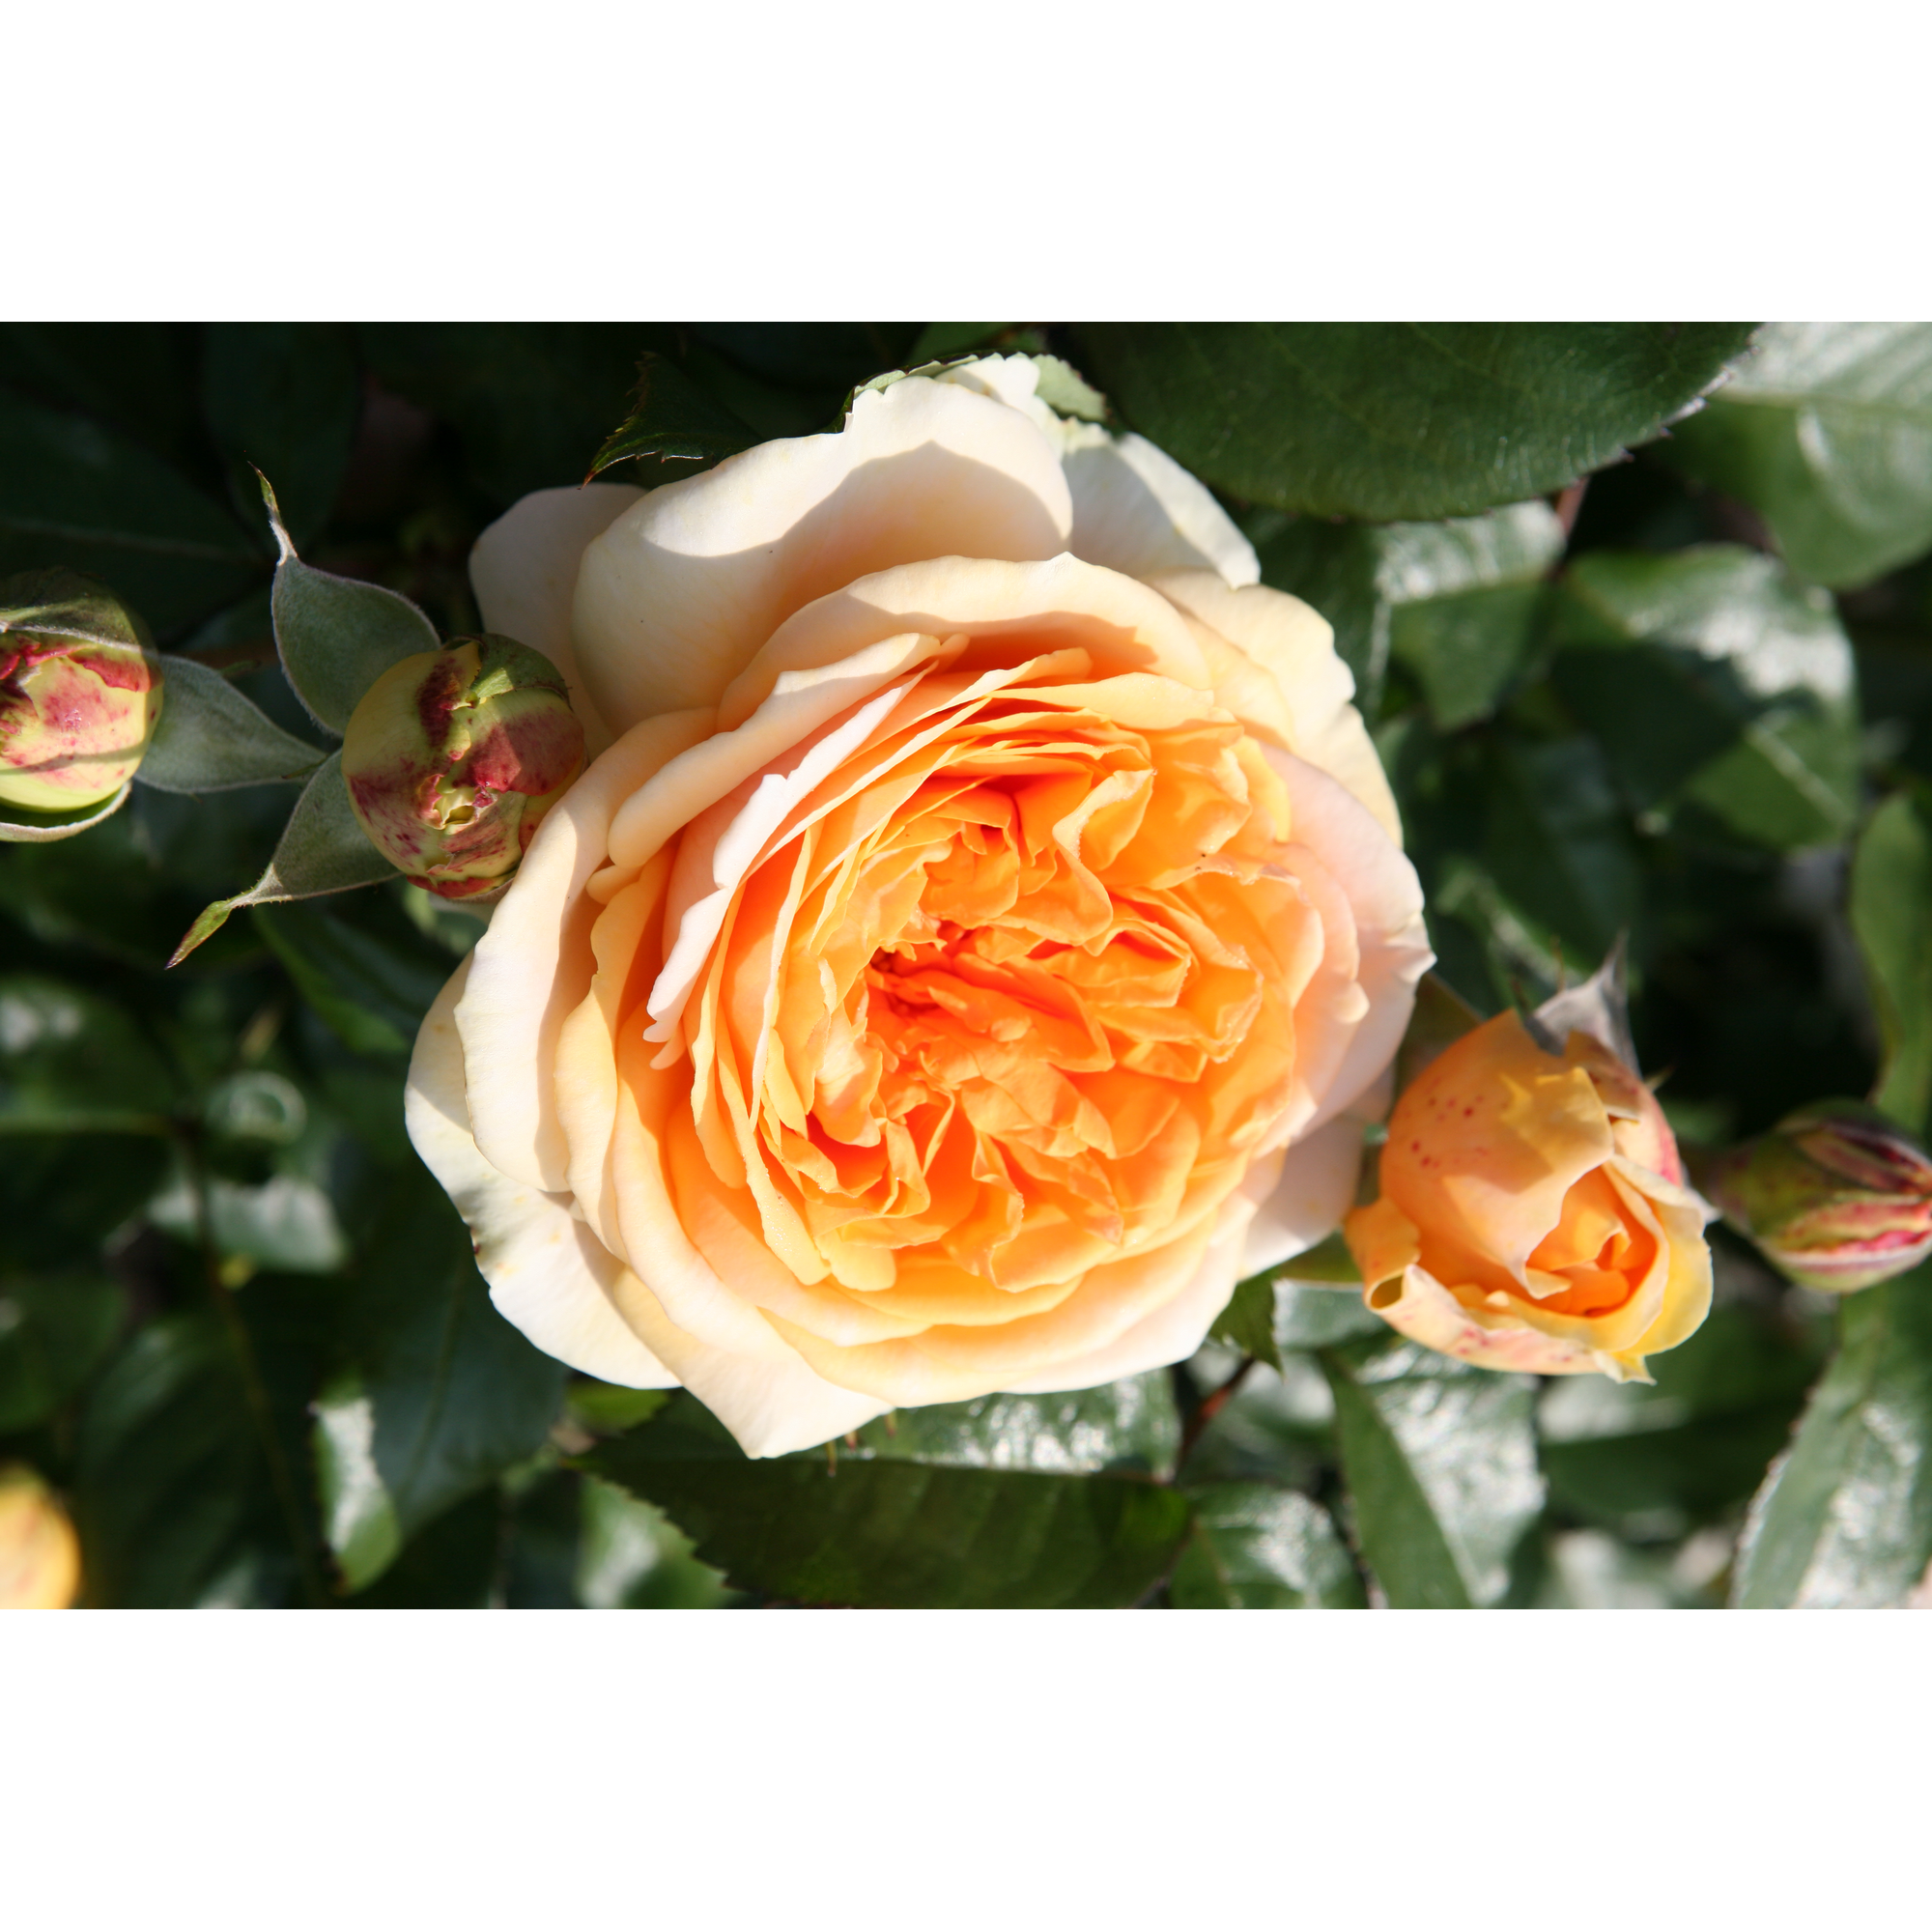 Rose 'Chippendale®' Halbstamm, 24 cm Topf + product picture